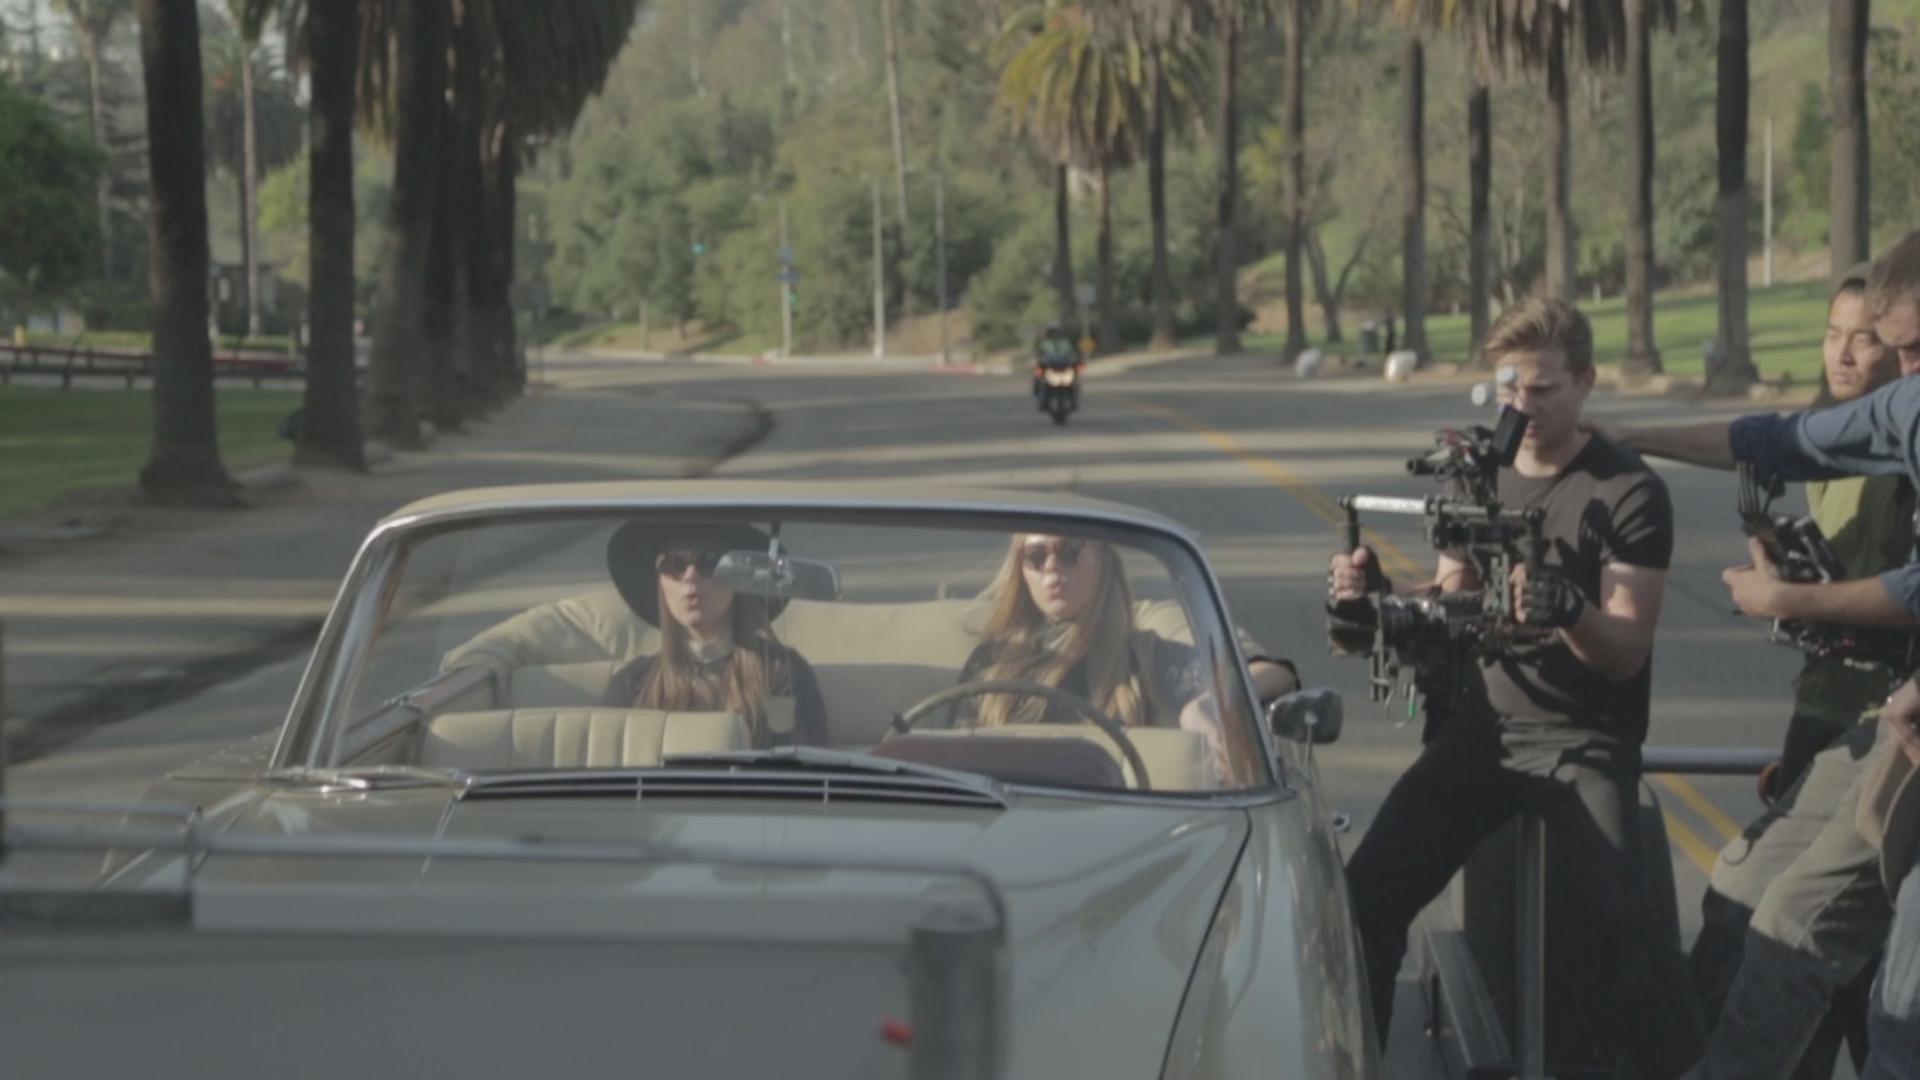 First Aid Kit - My Silver Lining - Behind The Scenes